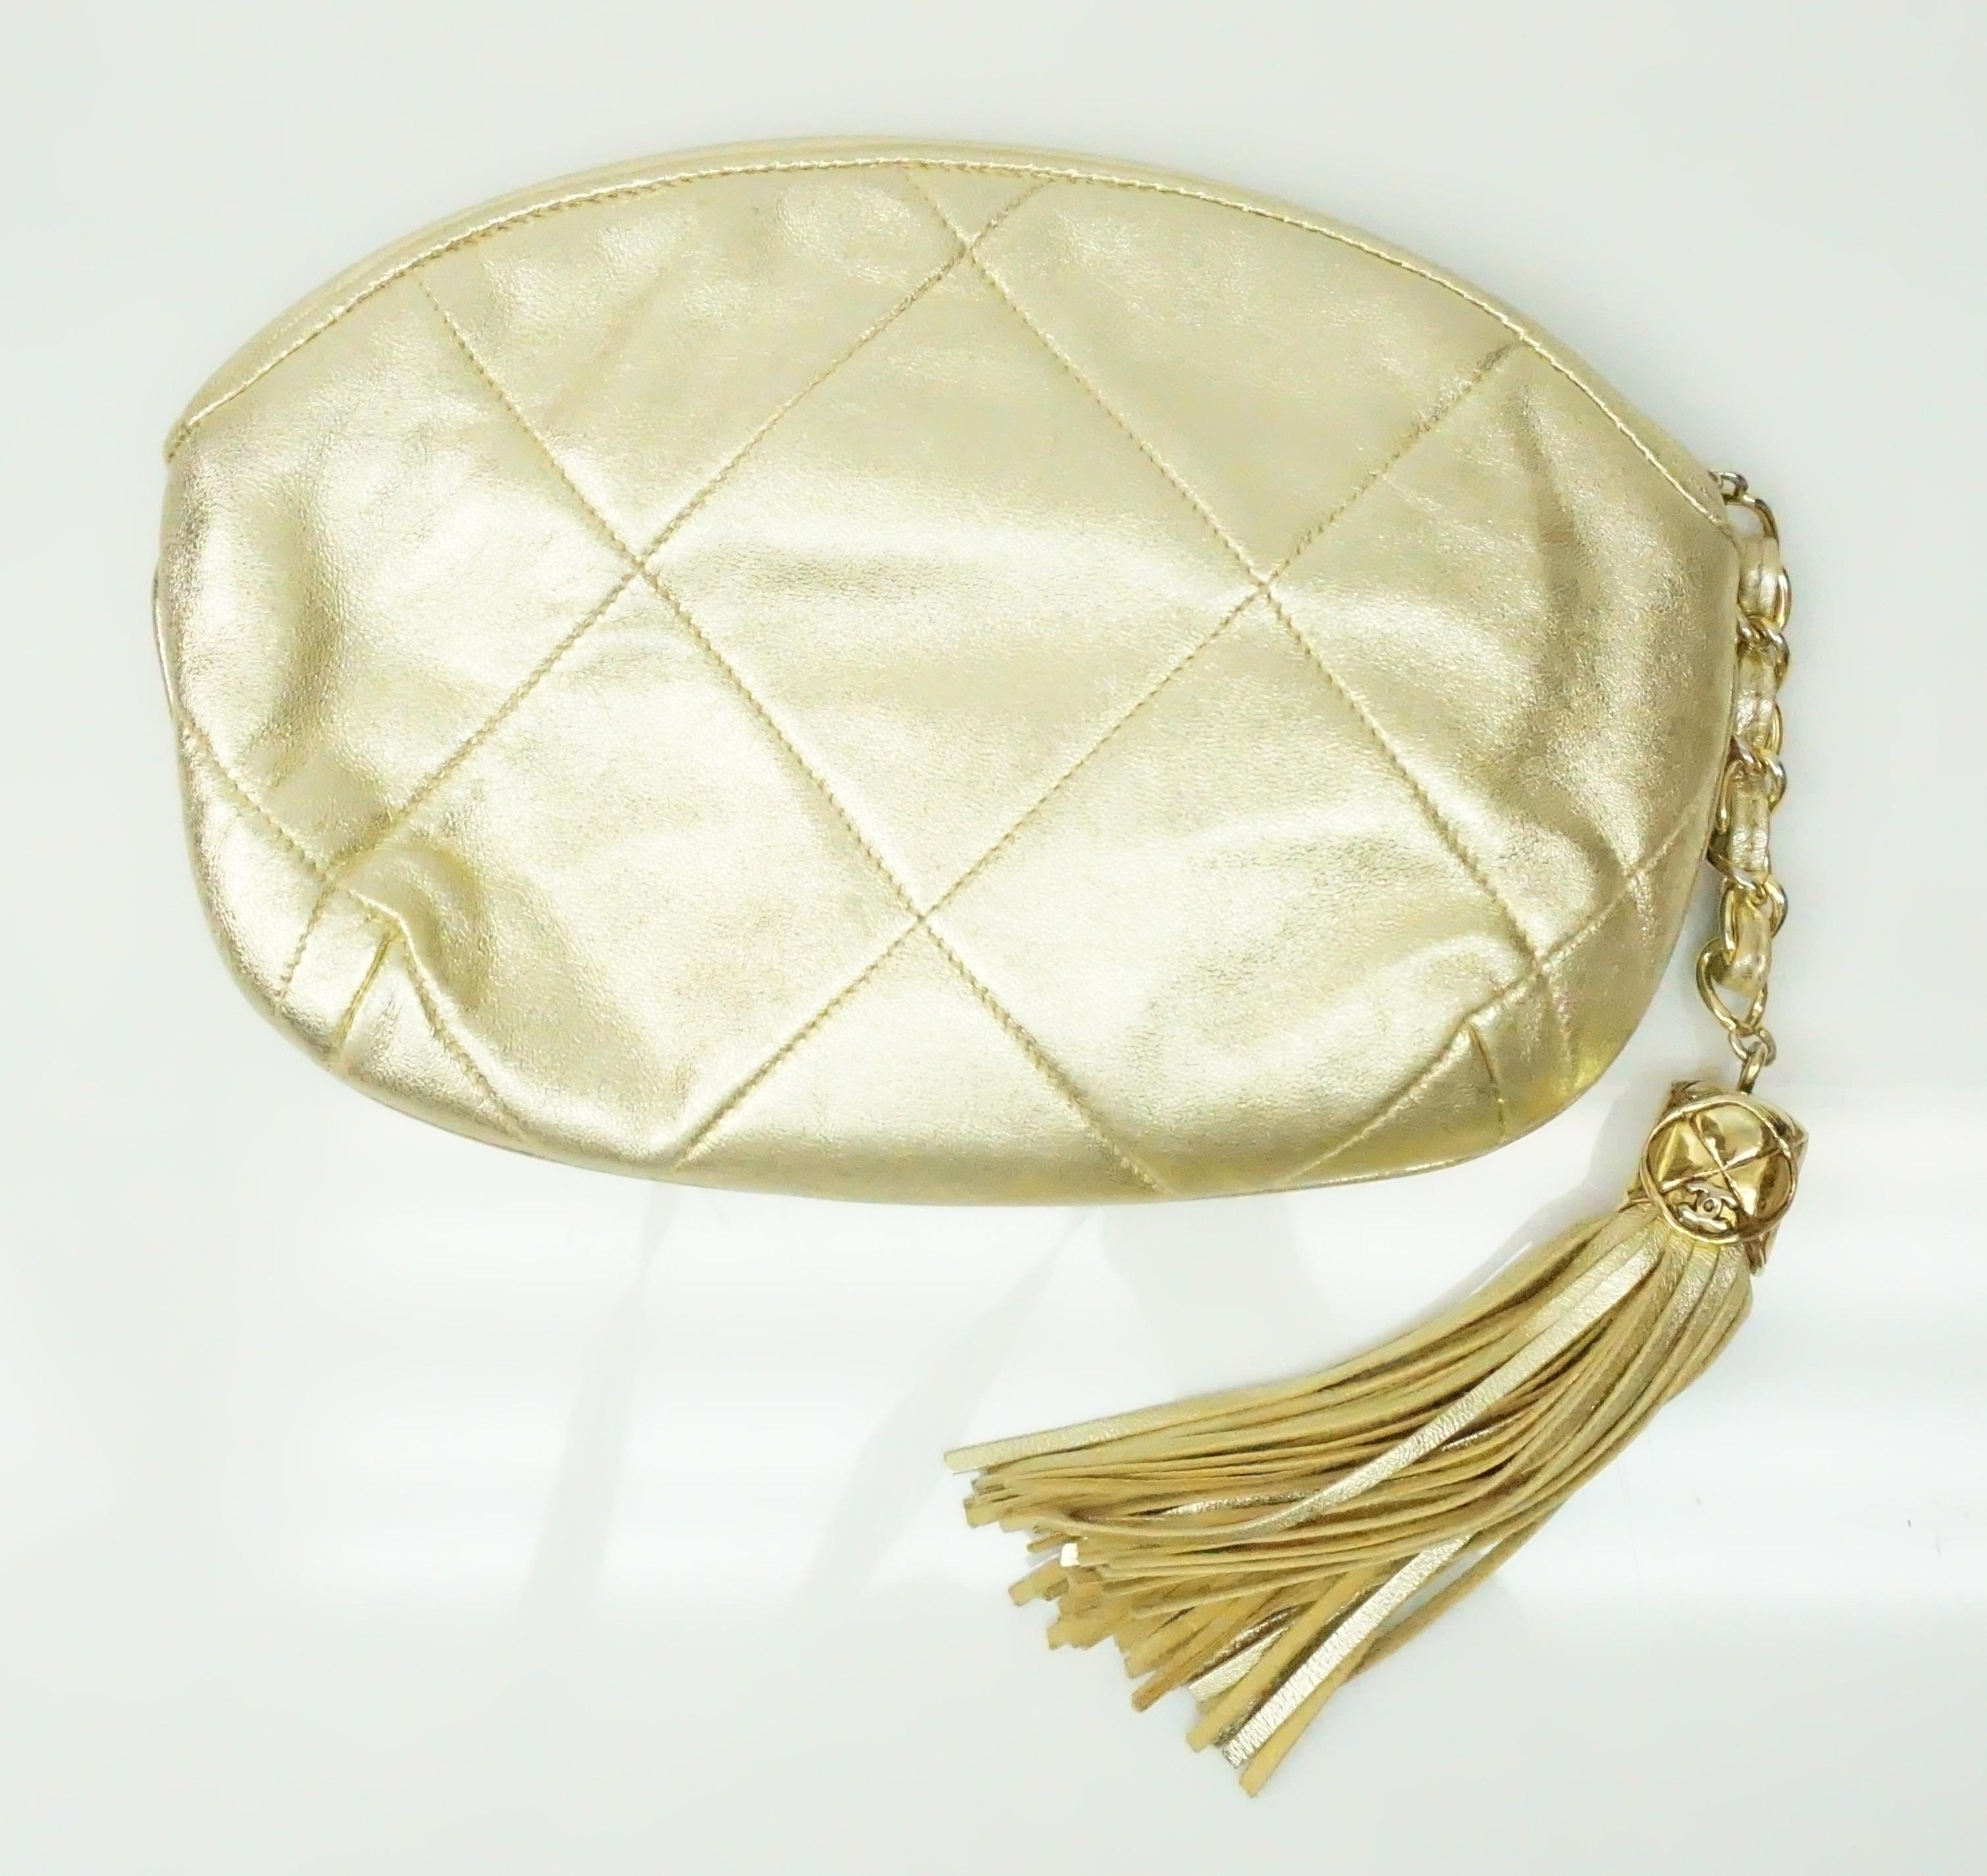 Chanel Gold Quilted Evening Clutch w/ Tassel- Circa 89. This beautiful vintage Chanel evening clutch is in great condition. It shows barely any sign of use except slight tarnishing of the zipper.  It is gold colored throughout and is made of soft